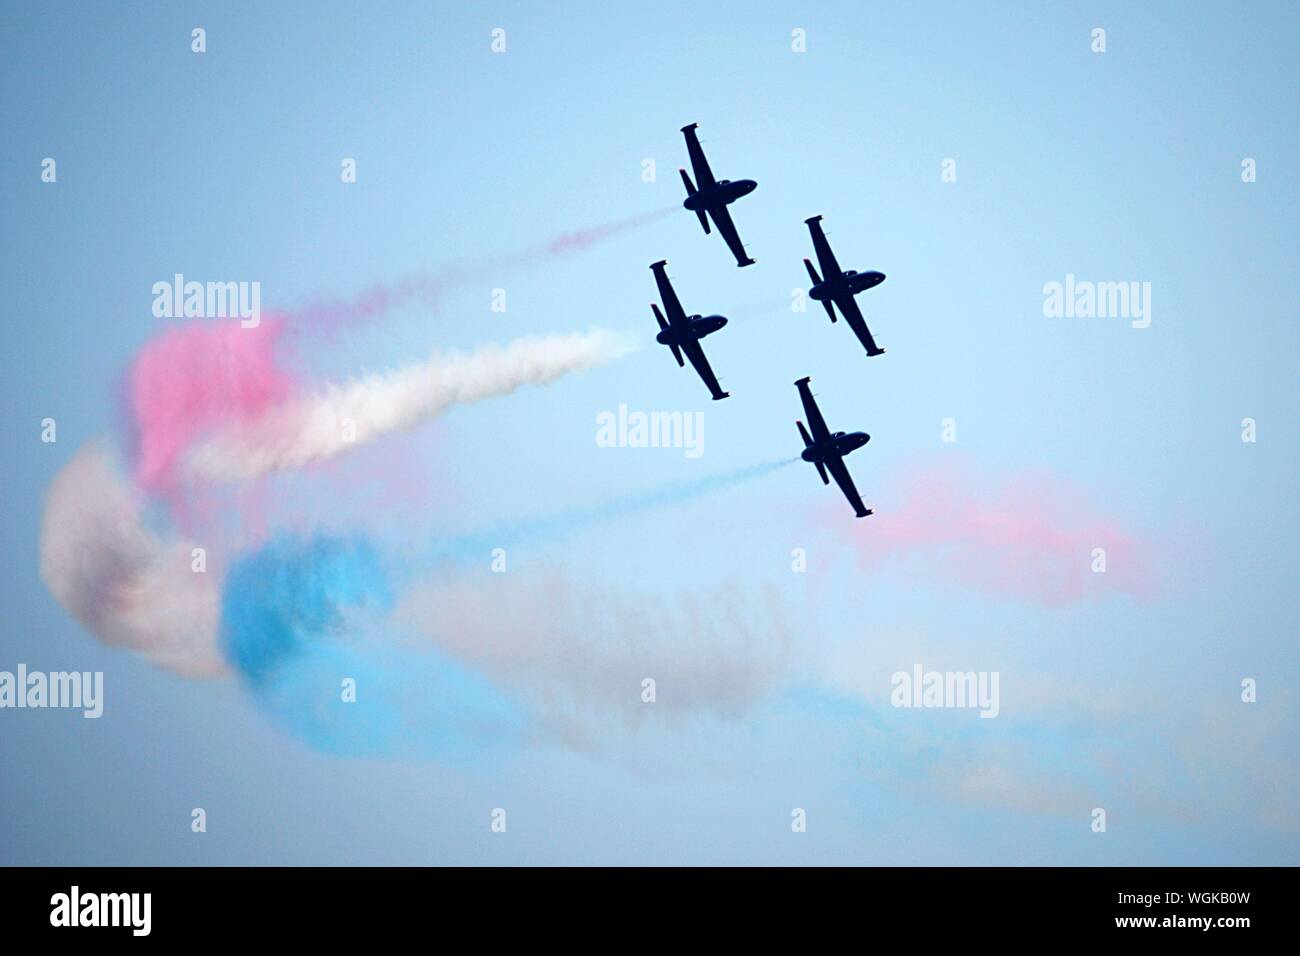 Low Angle View Of The Silhouette Fighter Jets Performing Airshow Stock Photo